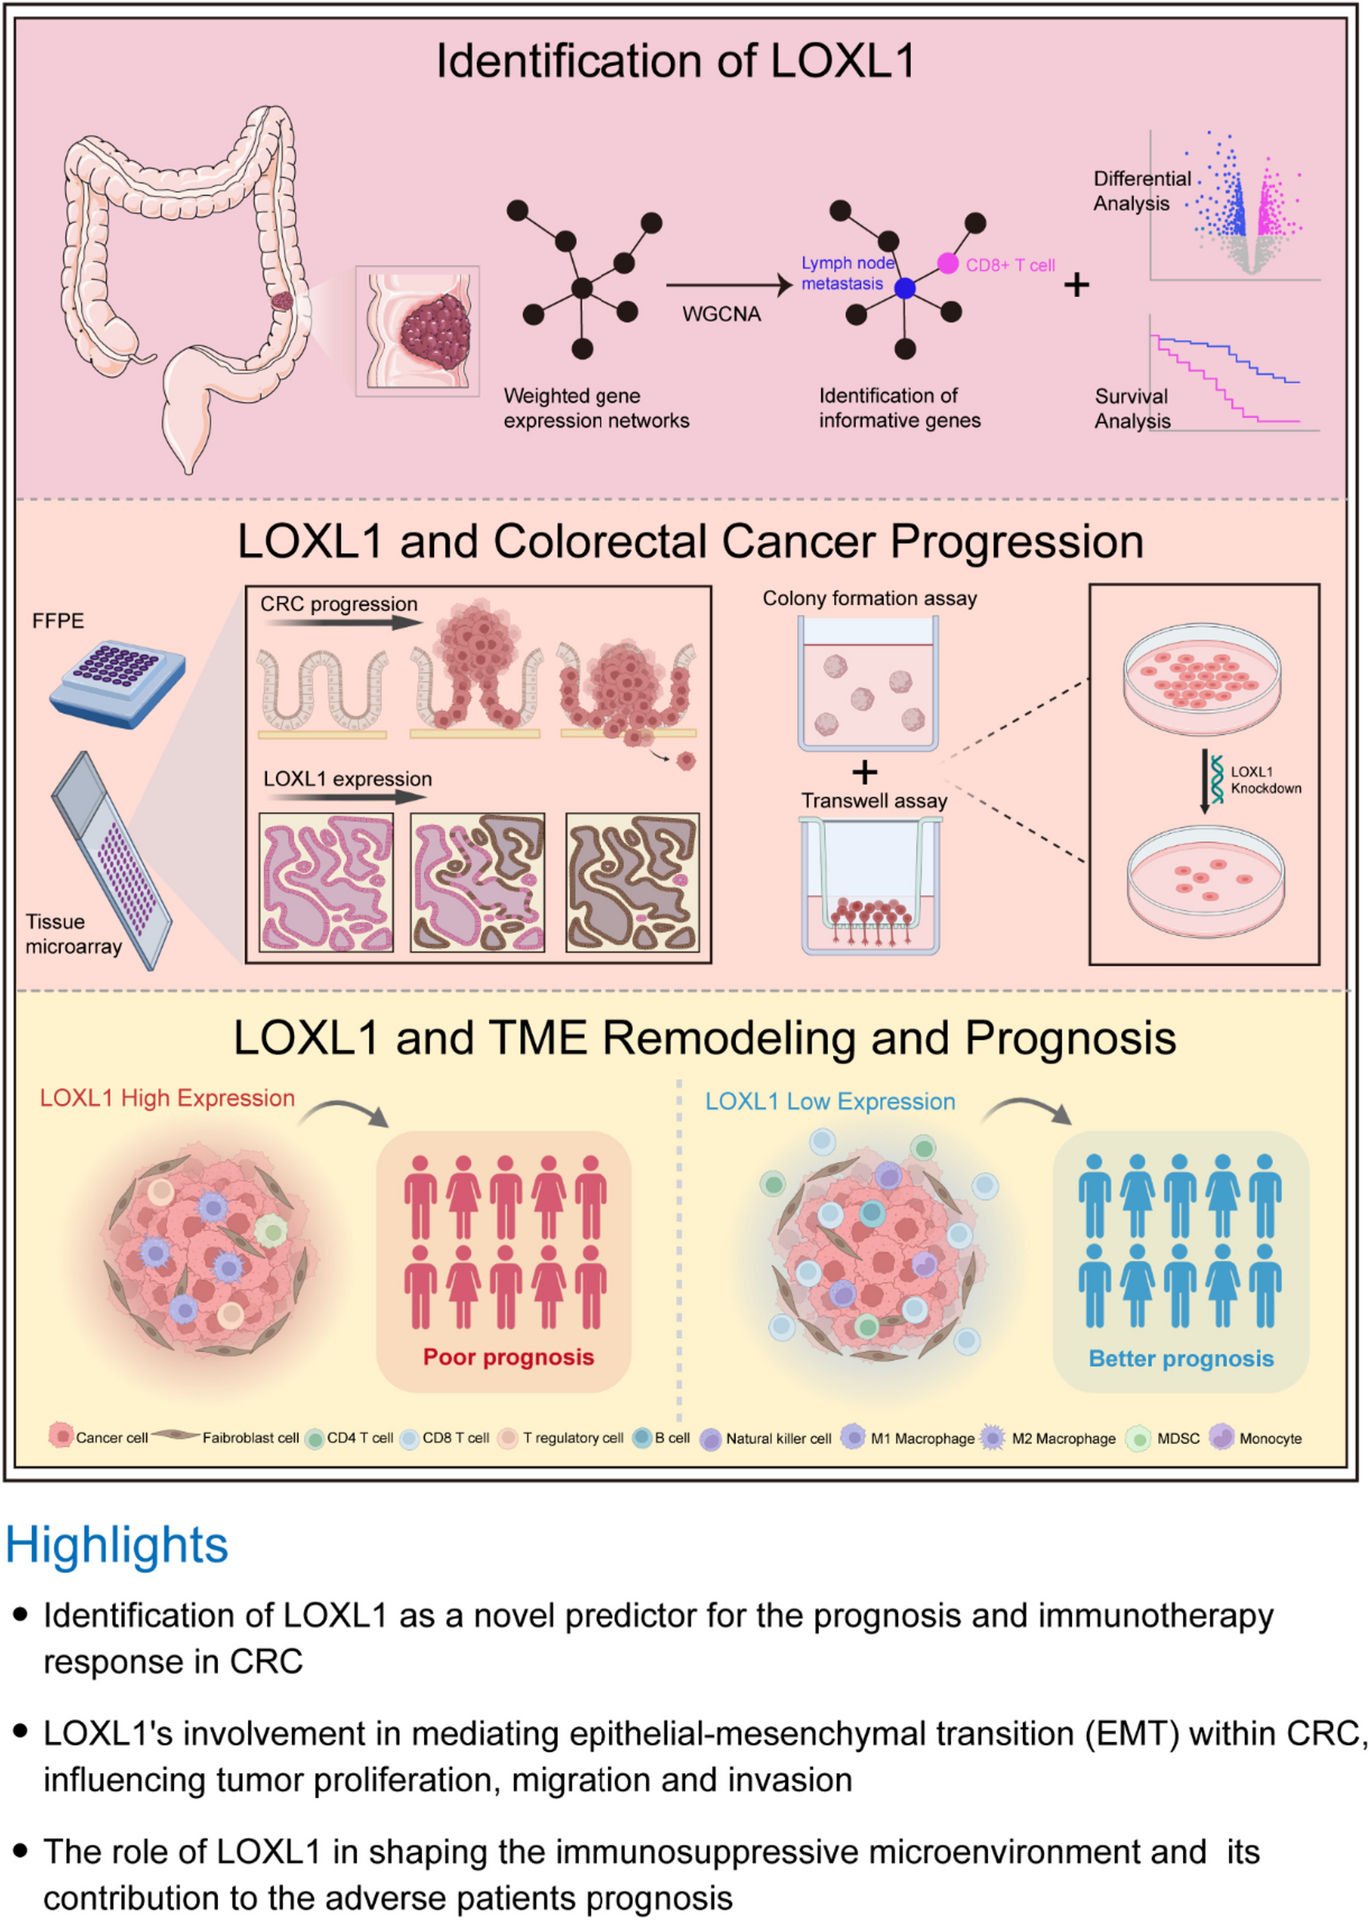 LOXL1 promotes tumor cell malignancy and restricts CD8 + T cell infiltration in colorectal cancer